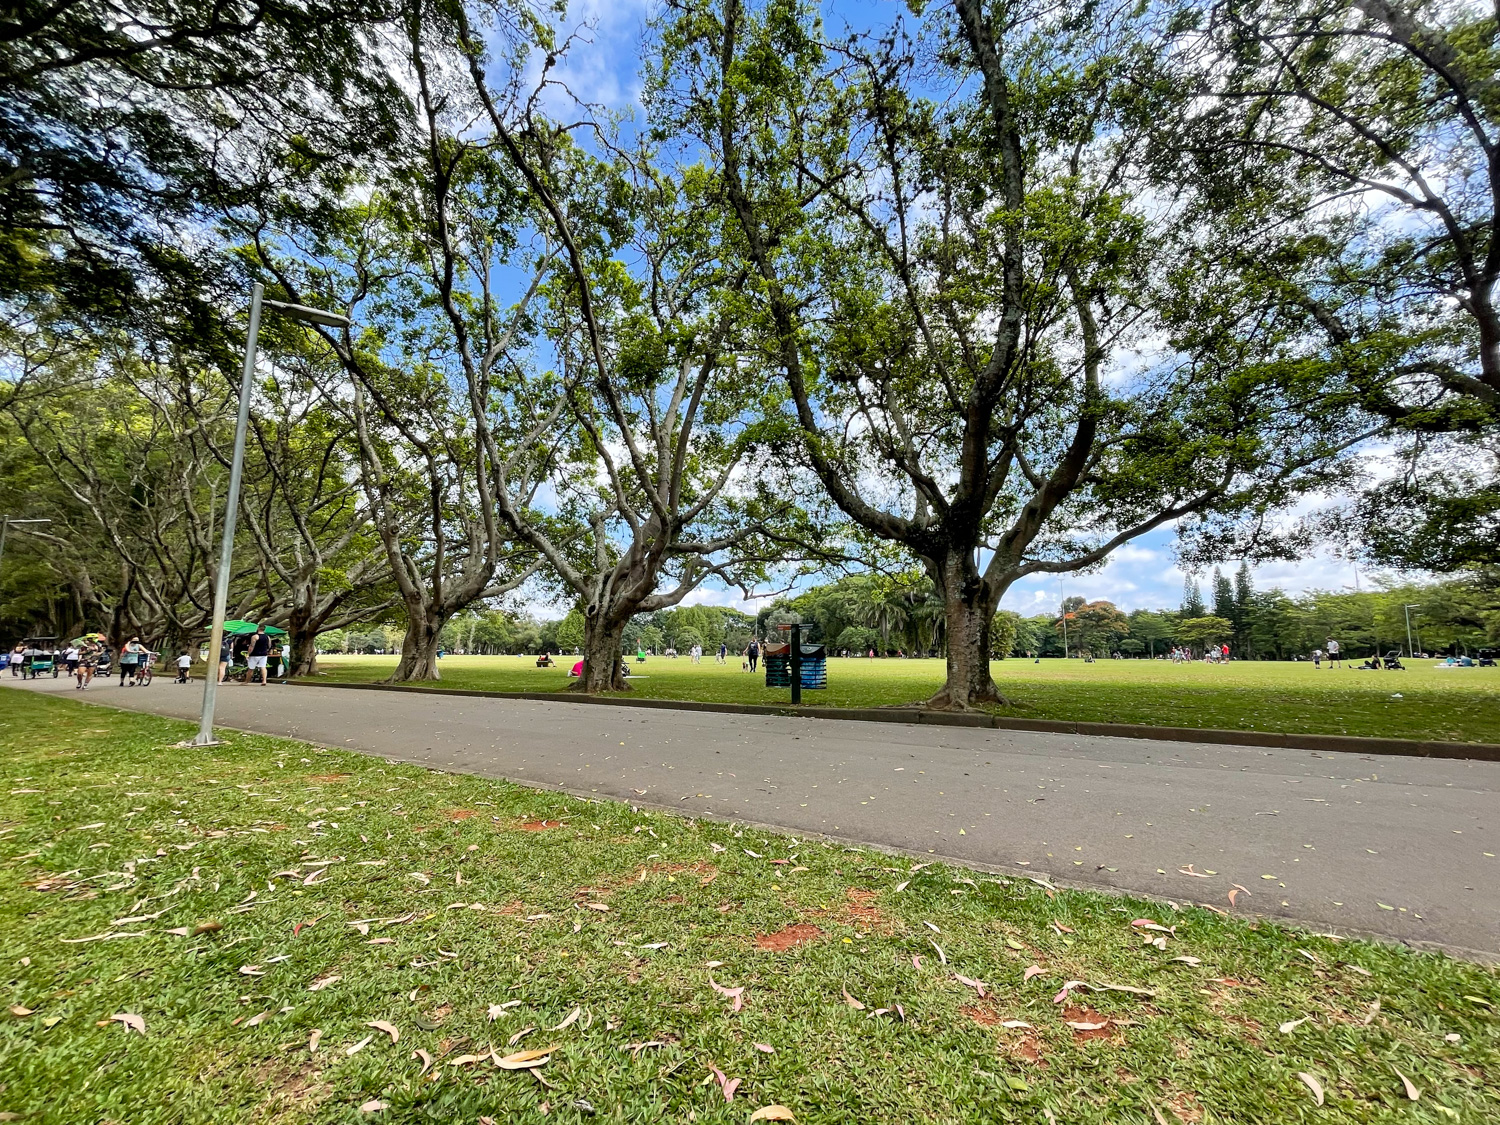 Trees at Ibirapuera Park in Sao Paolo.